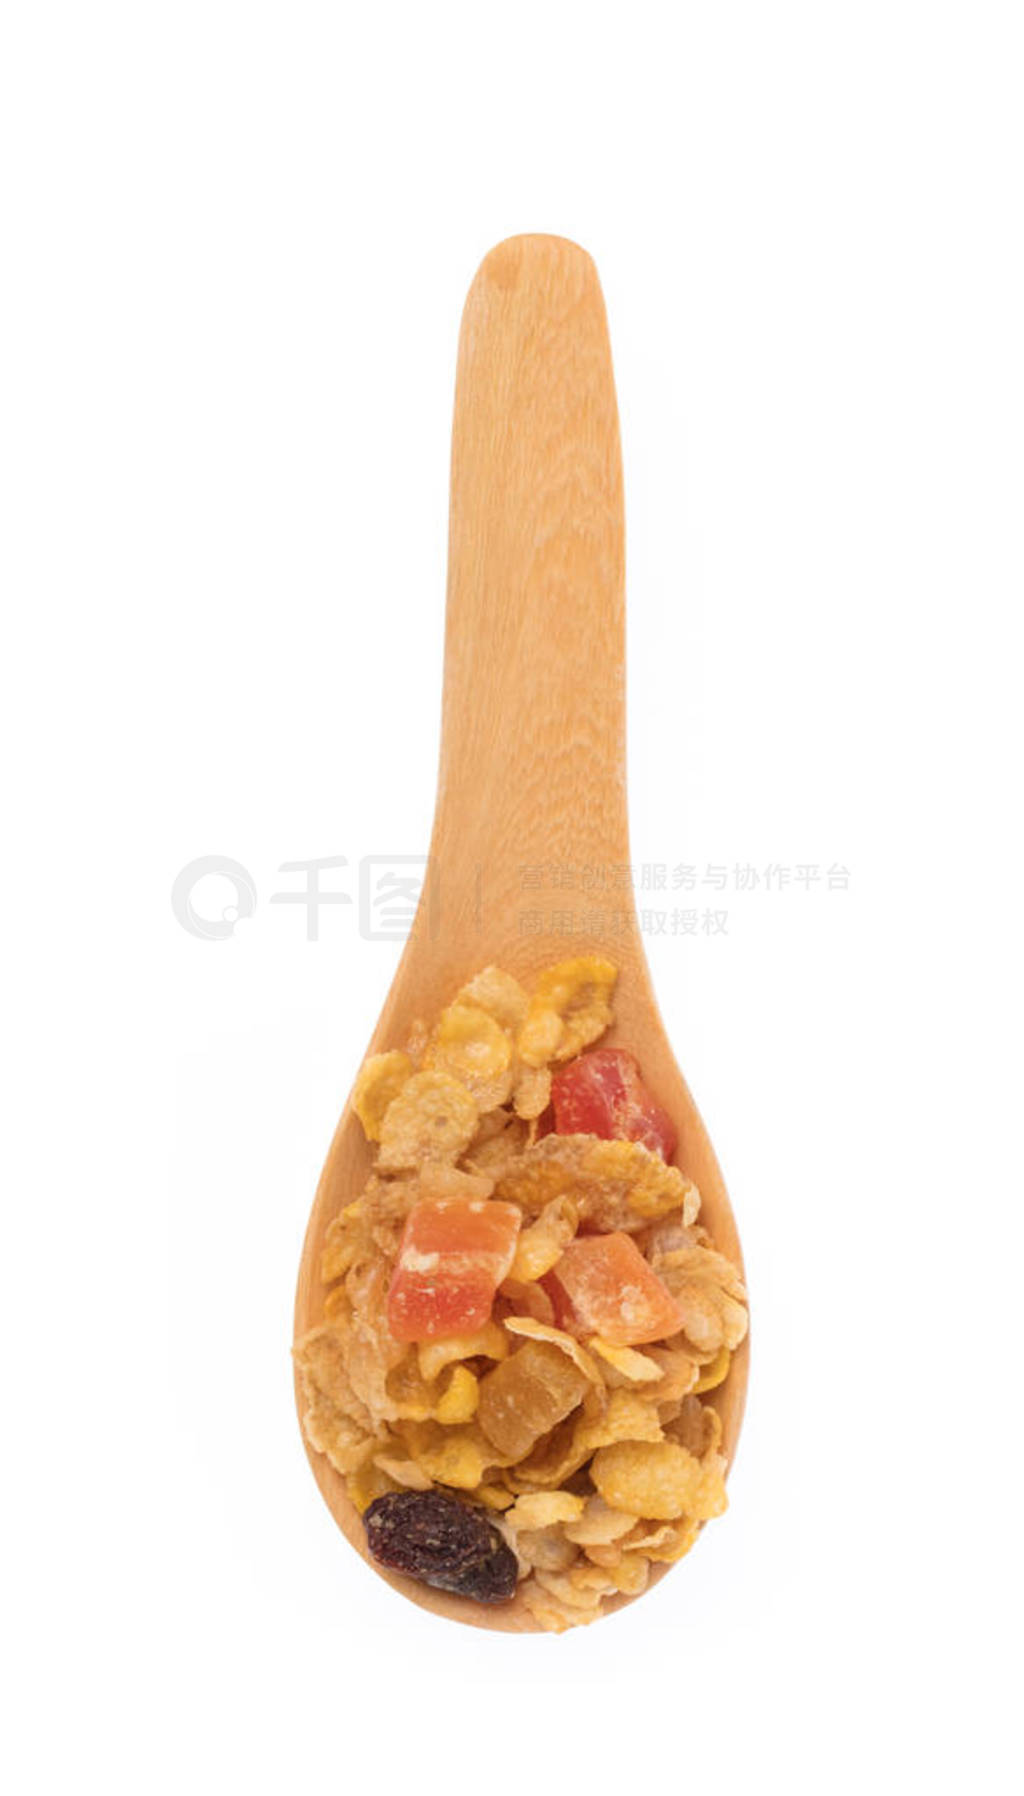 Cereal in wood ladle isolated on white background.